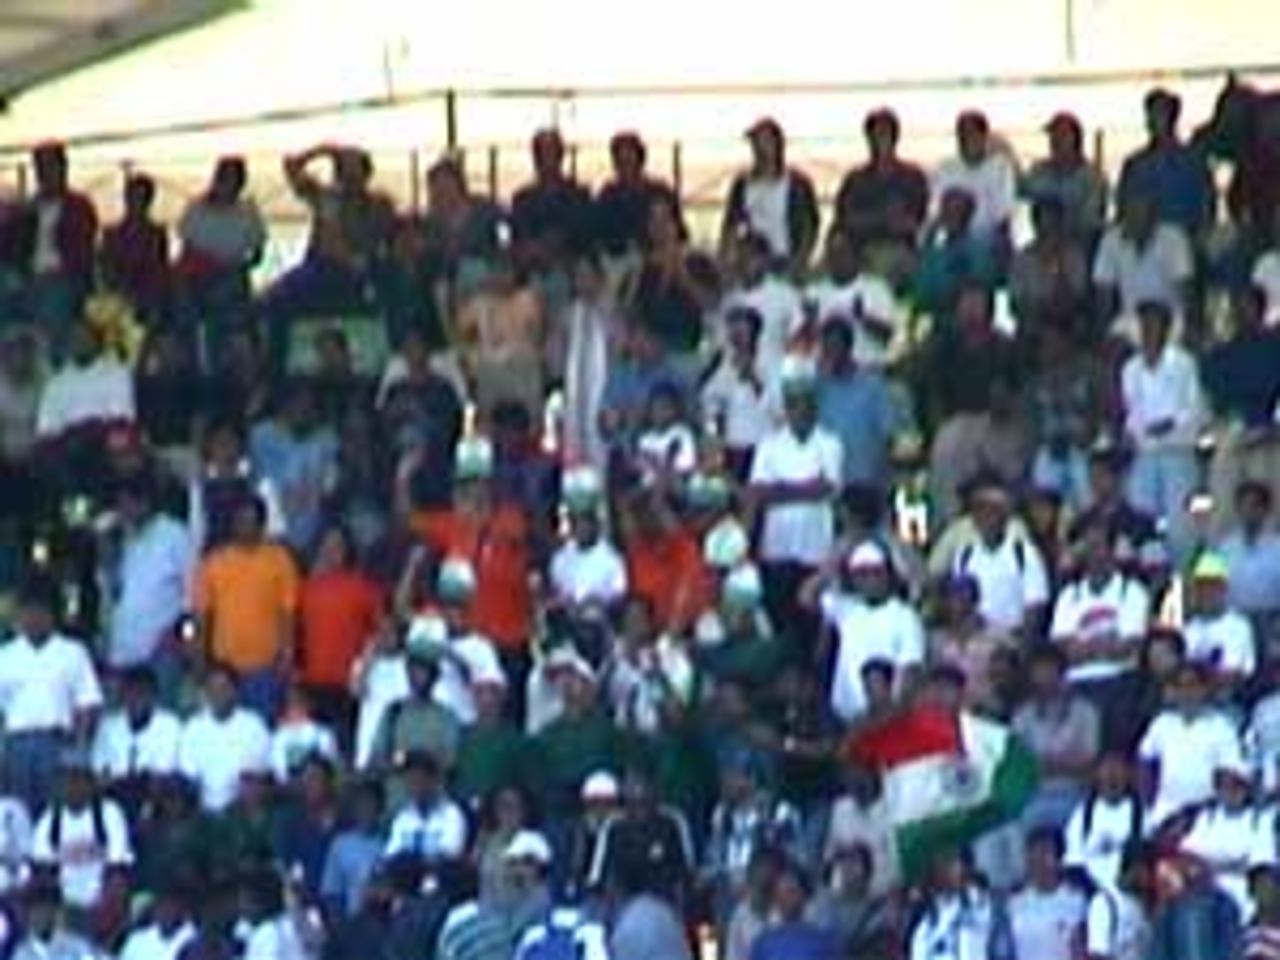 A section of the colourful Singapore crowd at the Kallang, India v West Indies (3rd ODI), Coca-Cola Singapore Challenge, 1999-2000, Kallang Ground, Singapore, 5 Sep 1999.